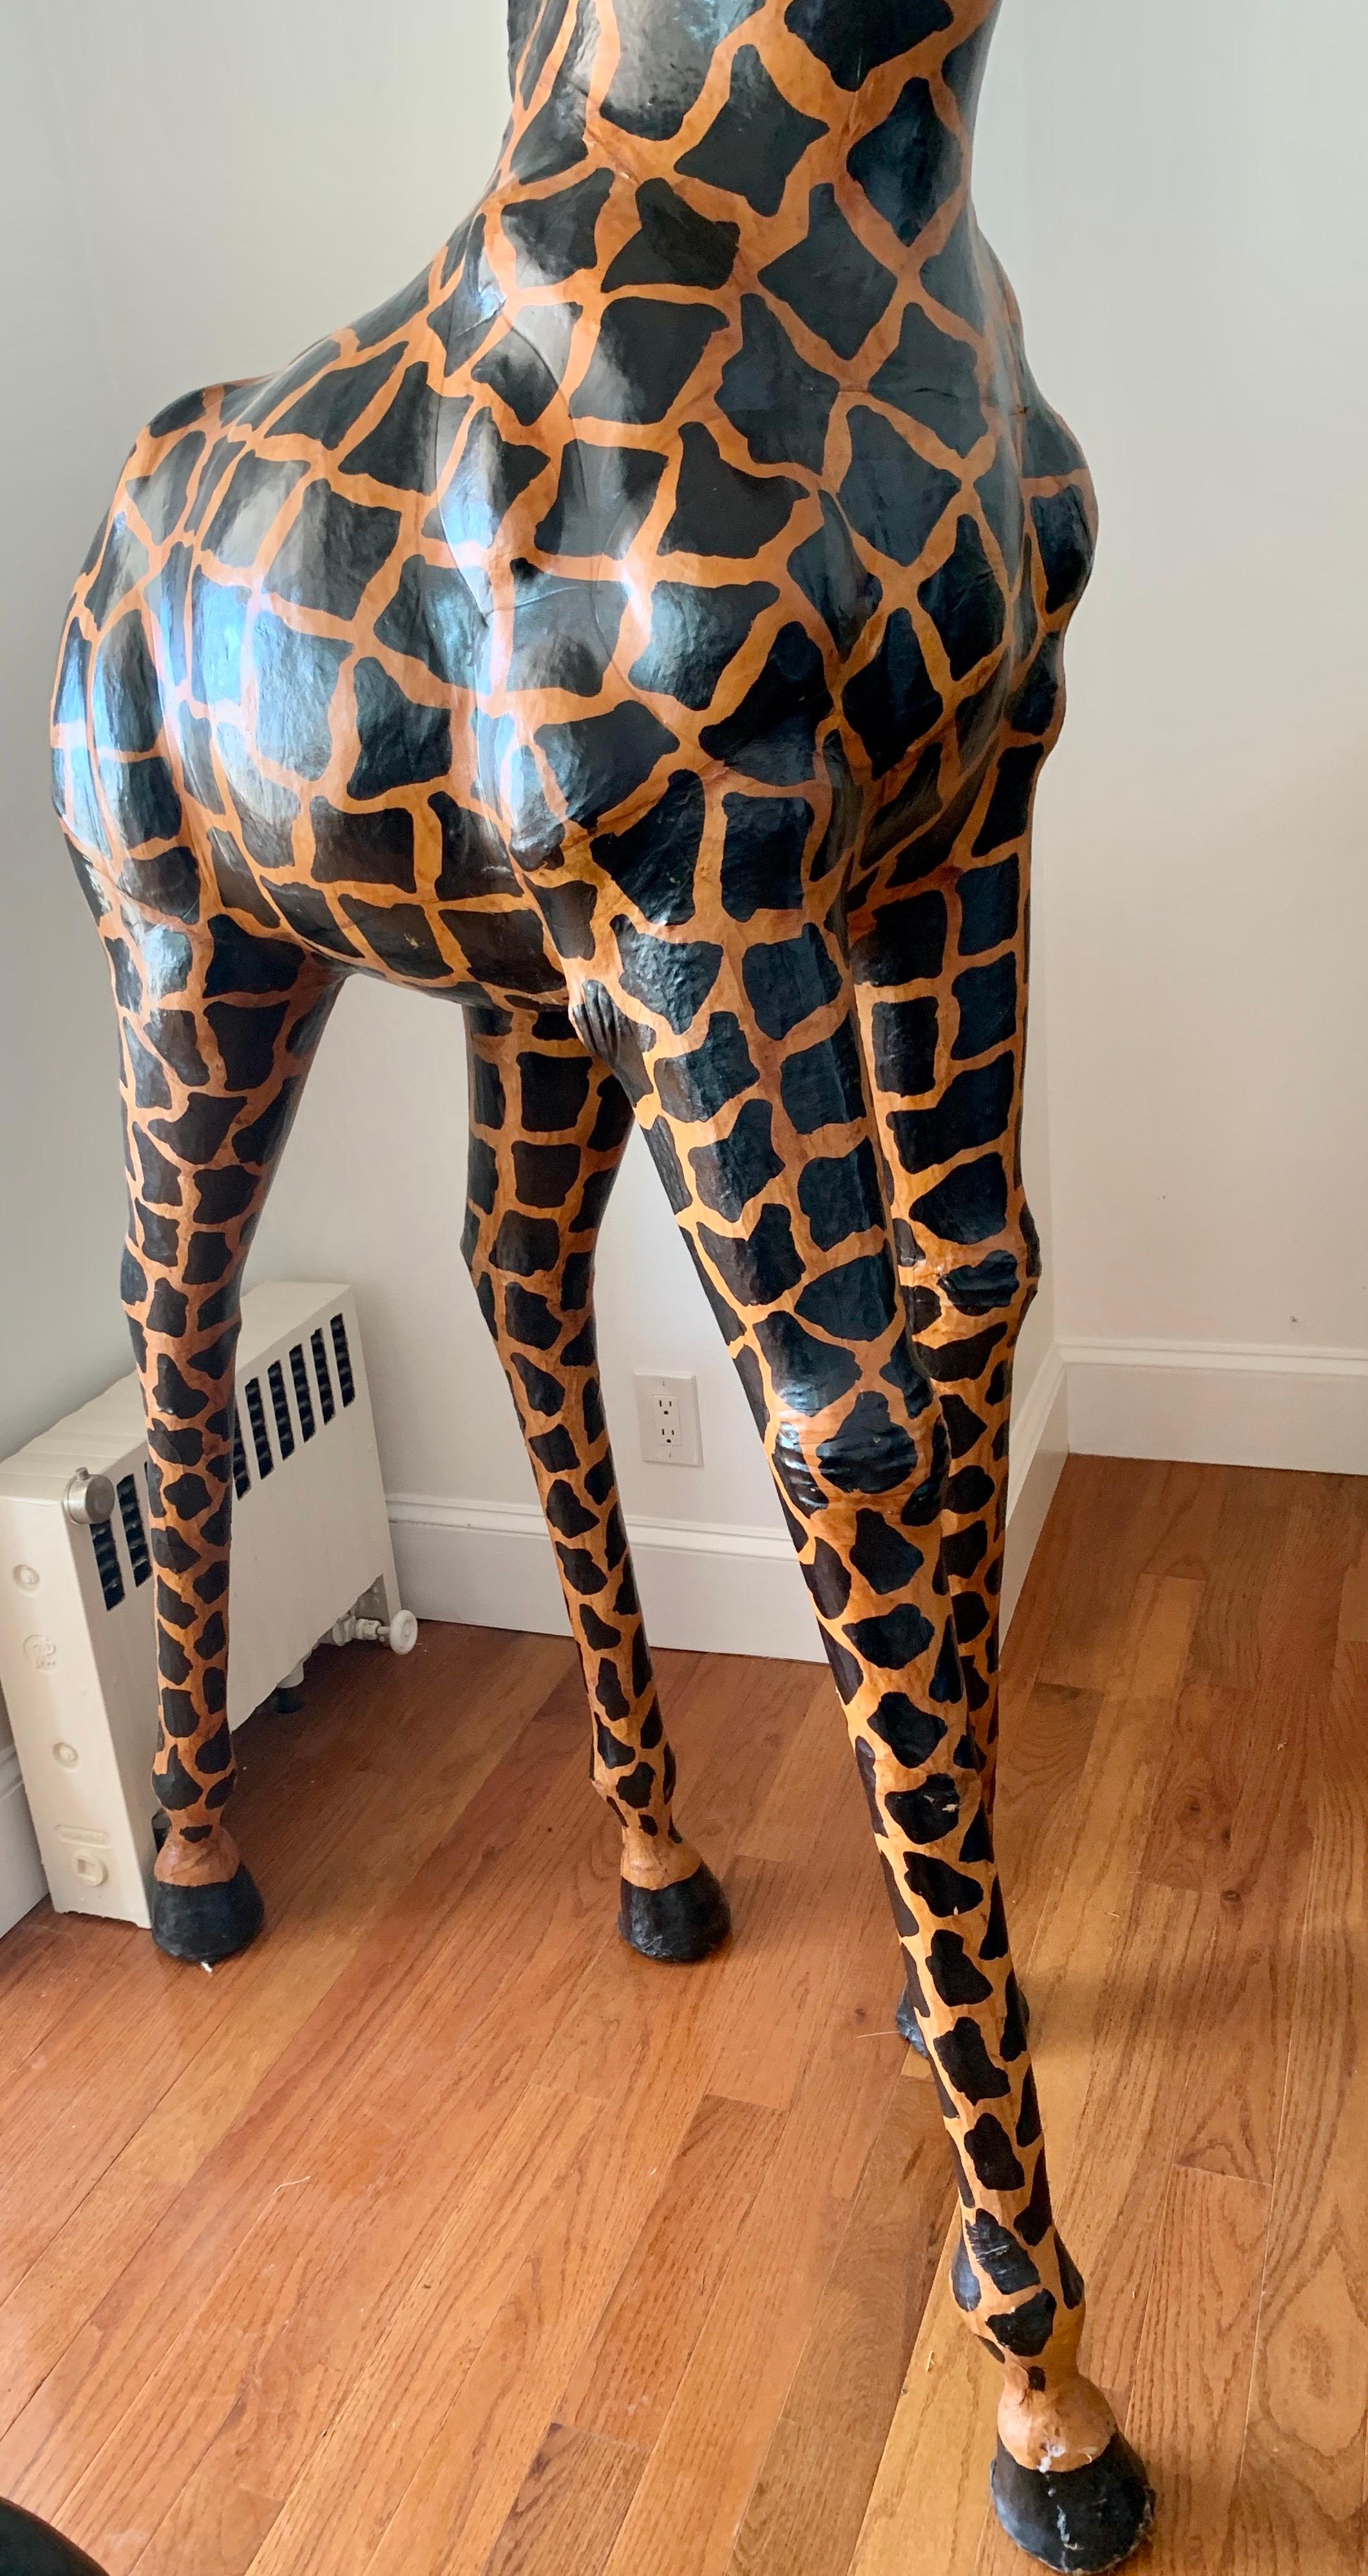 Large Life-Size Leather Giraffe Sculpture Almost Nine Feet Tall 9